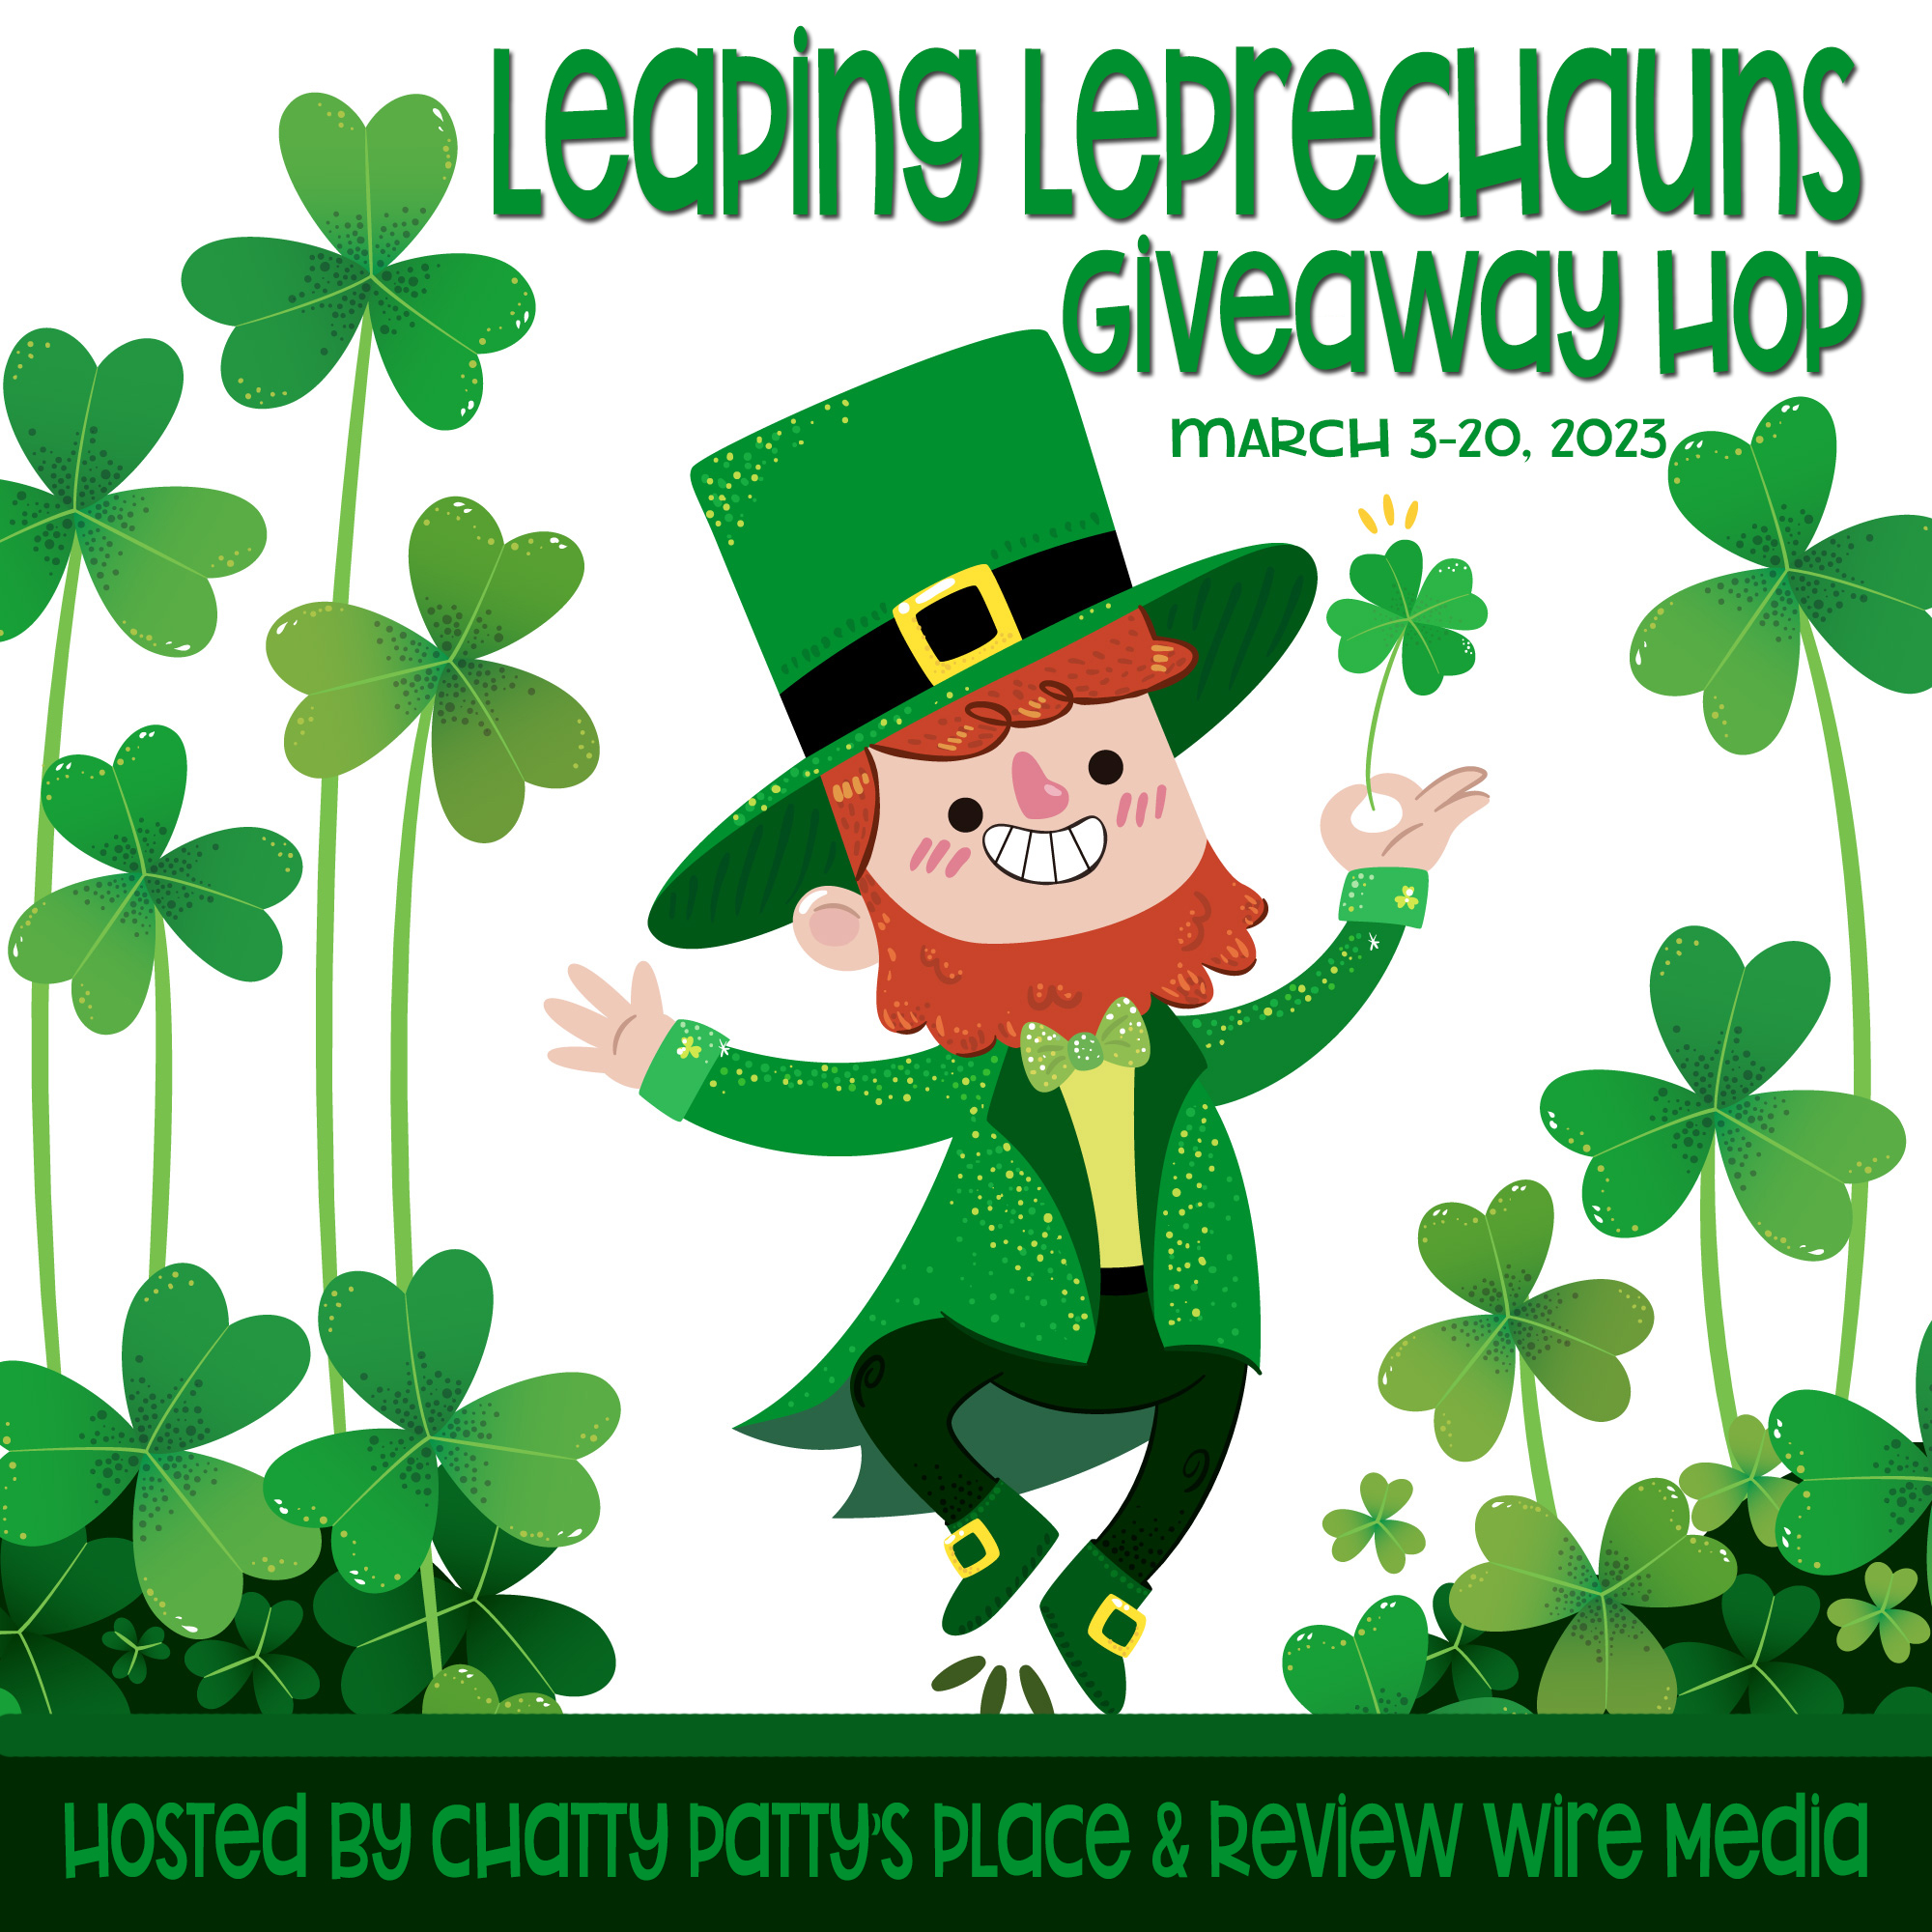 Leaping Leprechauns Giveaway Hop – Sponsored by @TheReviewWire & @chattypattysplc